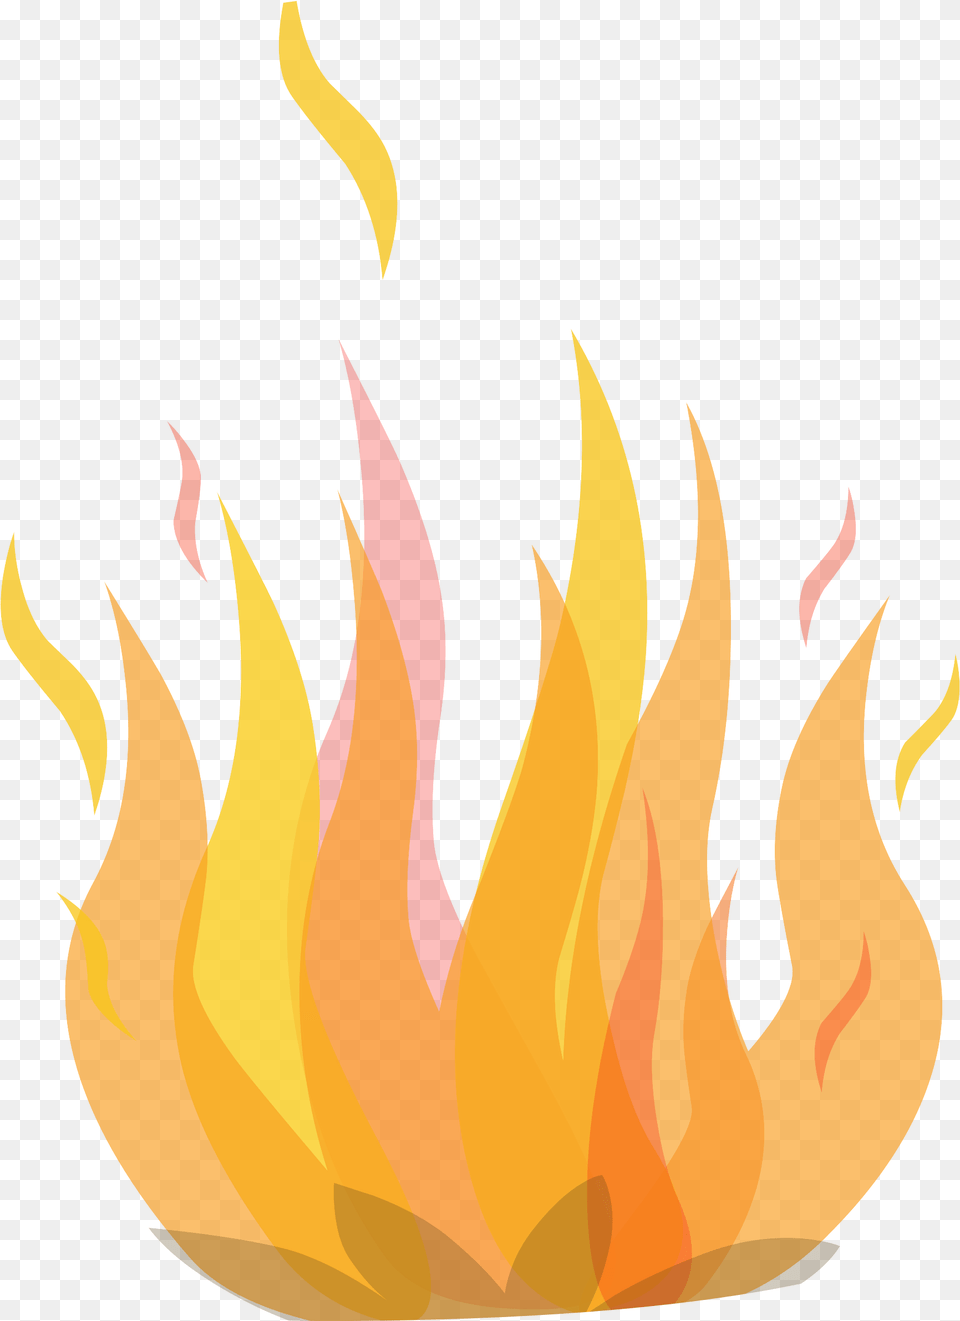 This Free Icons Design Of Firebog Hearth Fire, Flame, Person Png Image